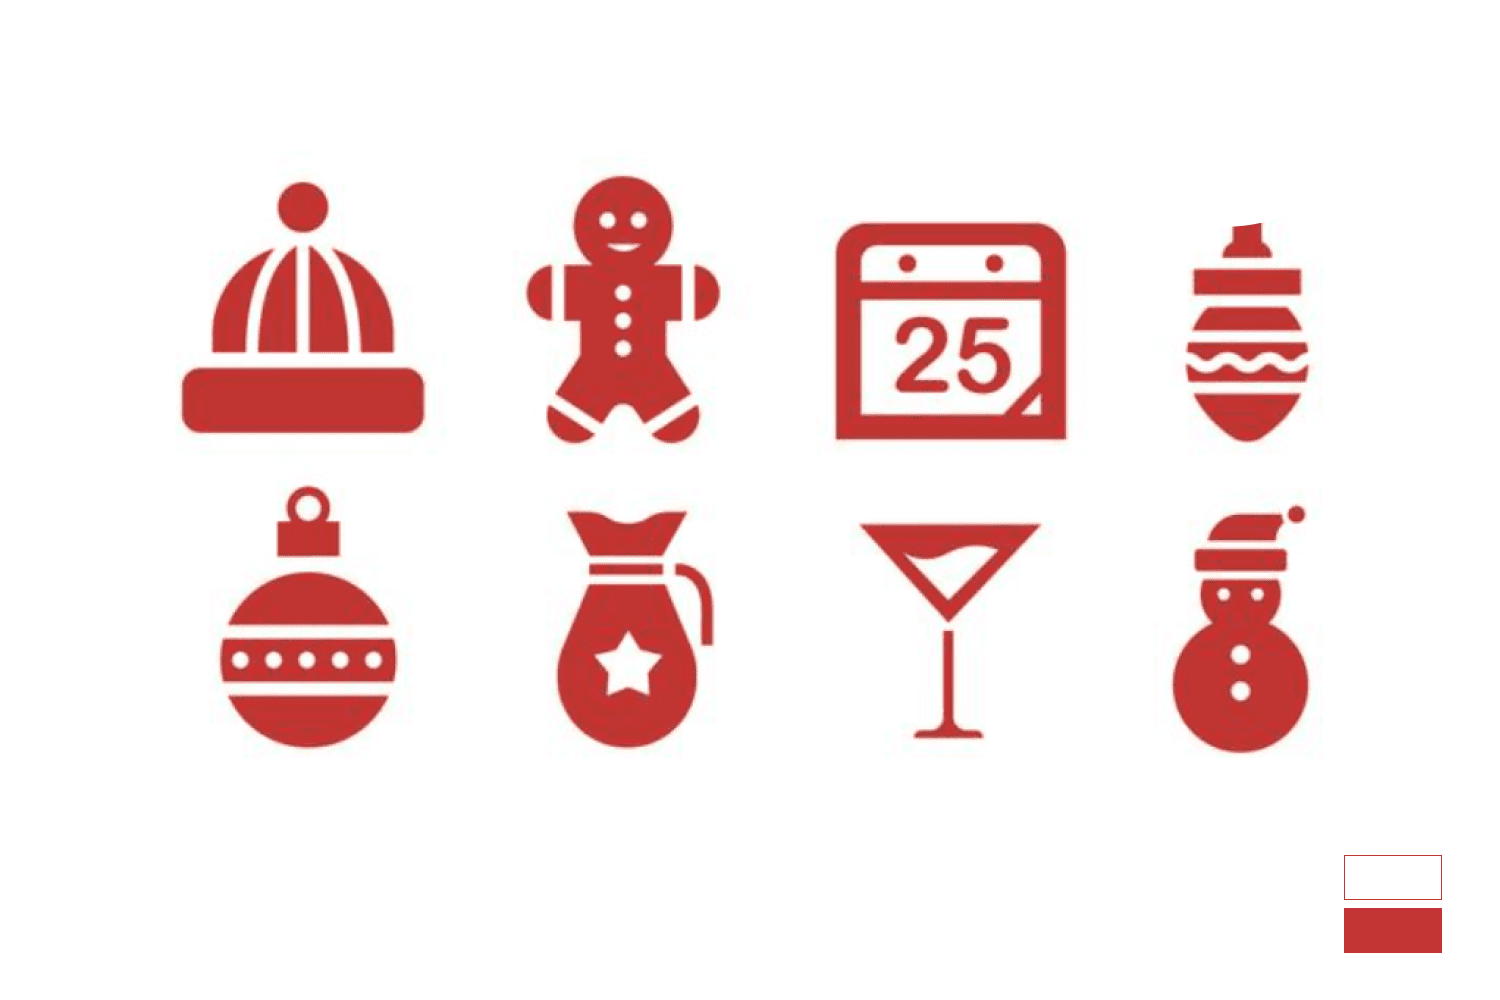 Christmas app icons of red color in a modern app-like style.